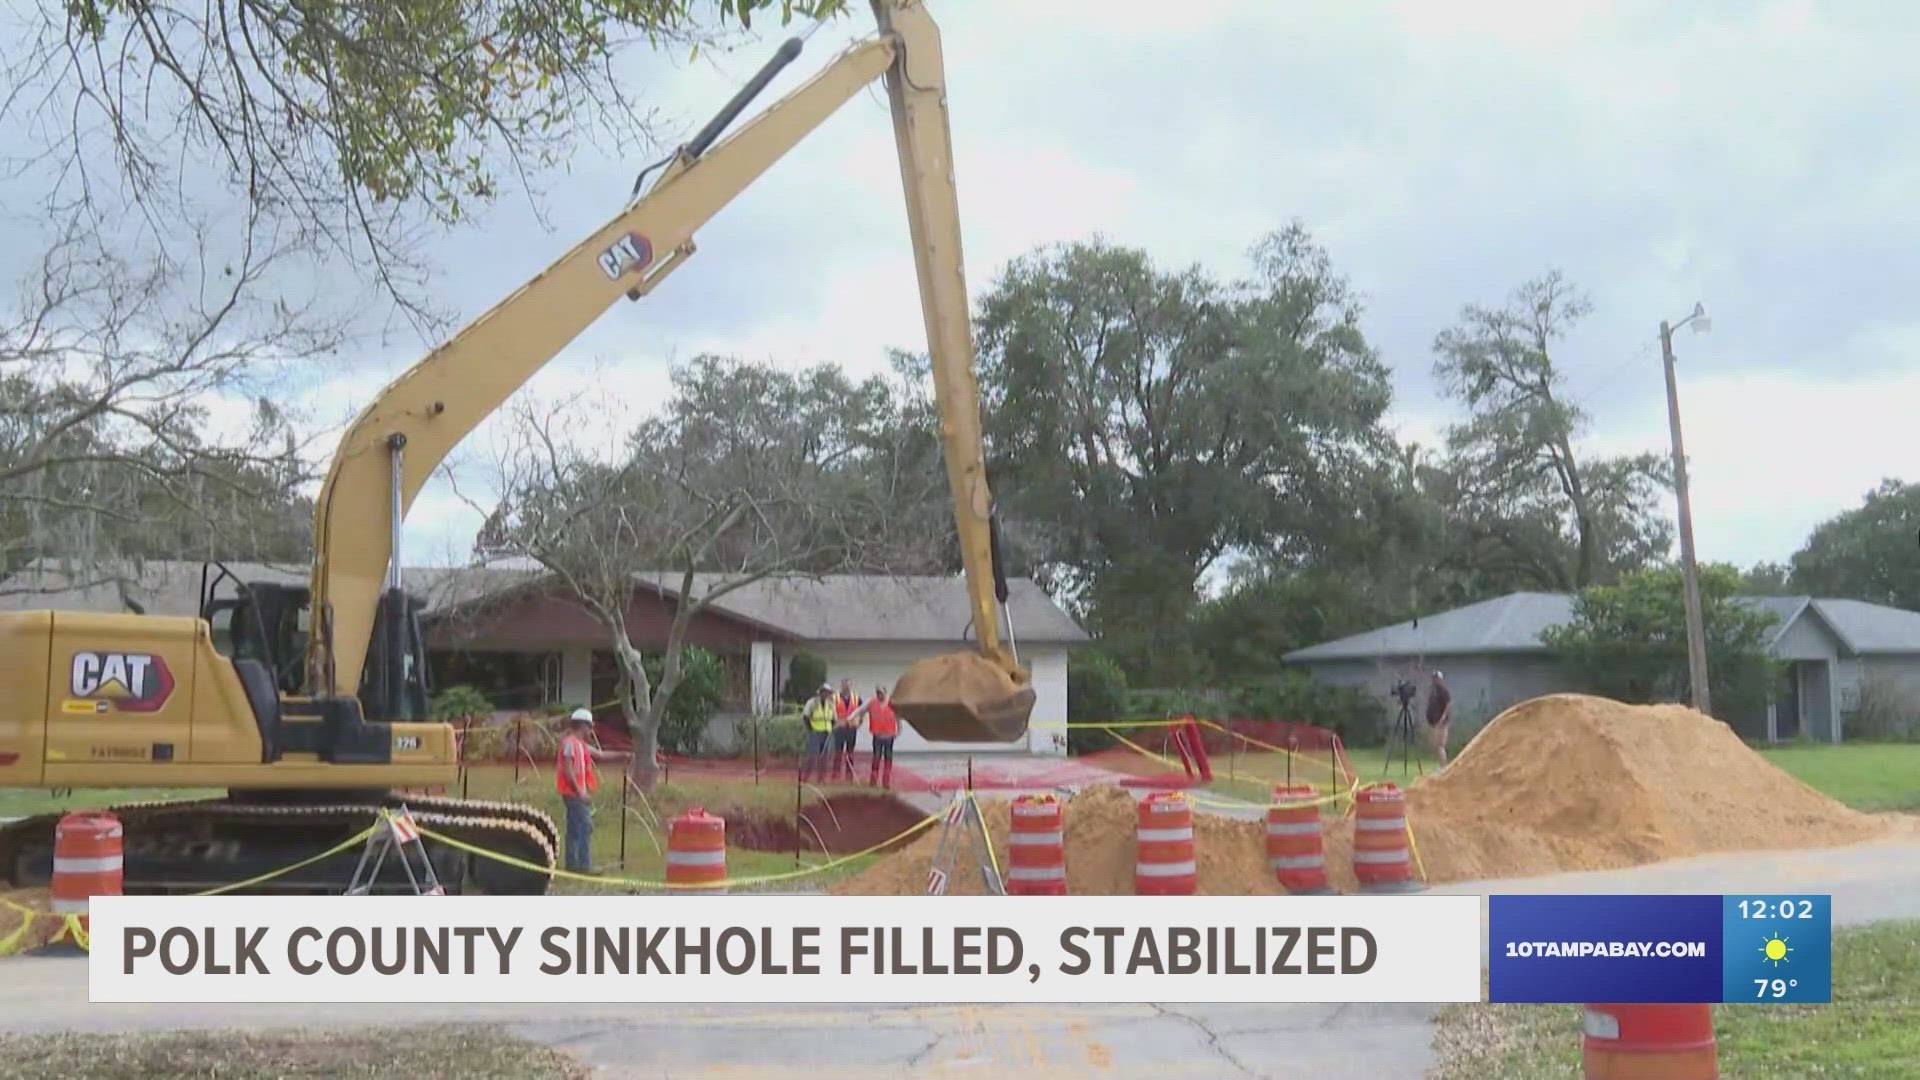 The family that owns the property has been able to return to their home, but say they're still concerned about the threat of sinkholes.